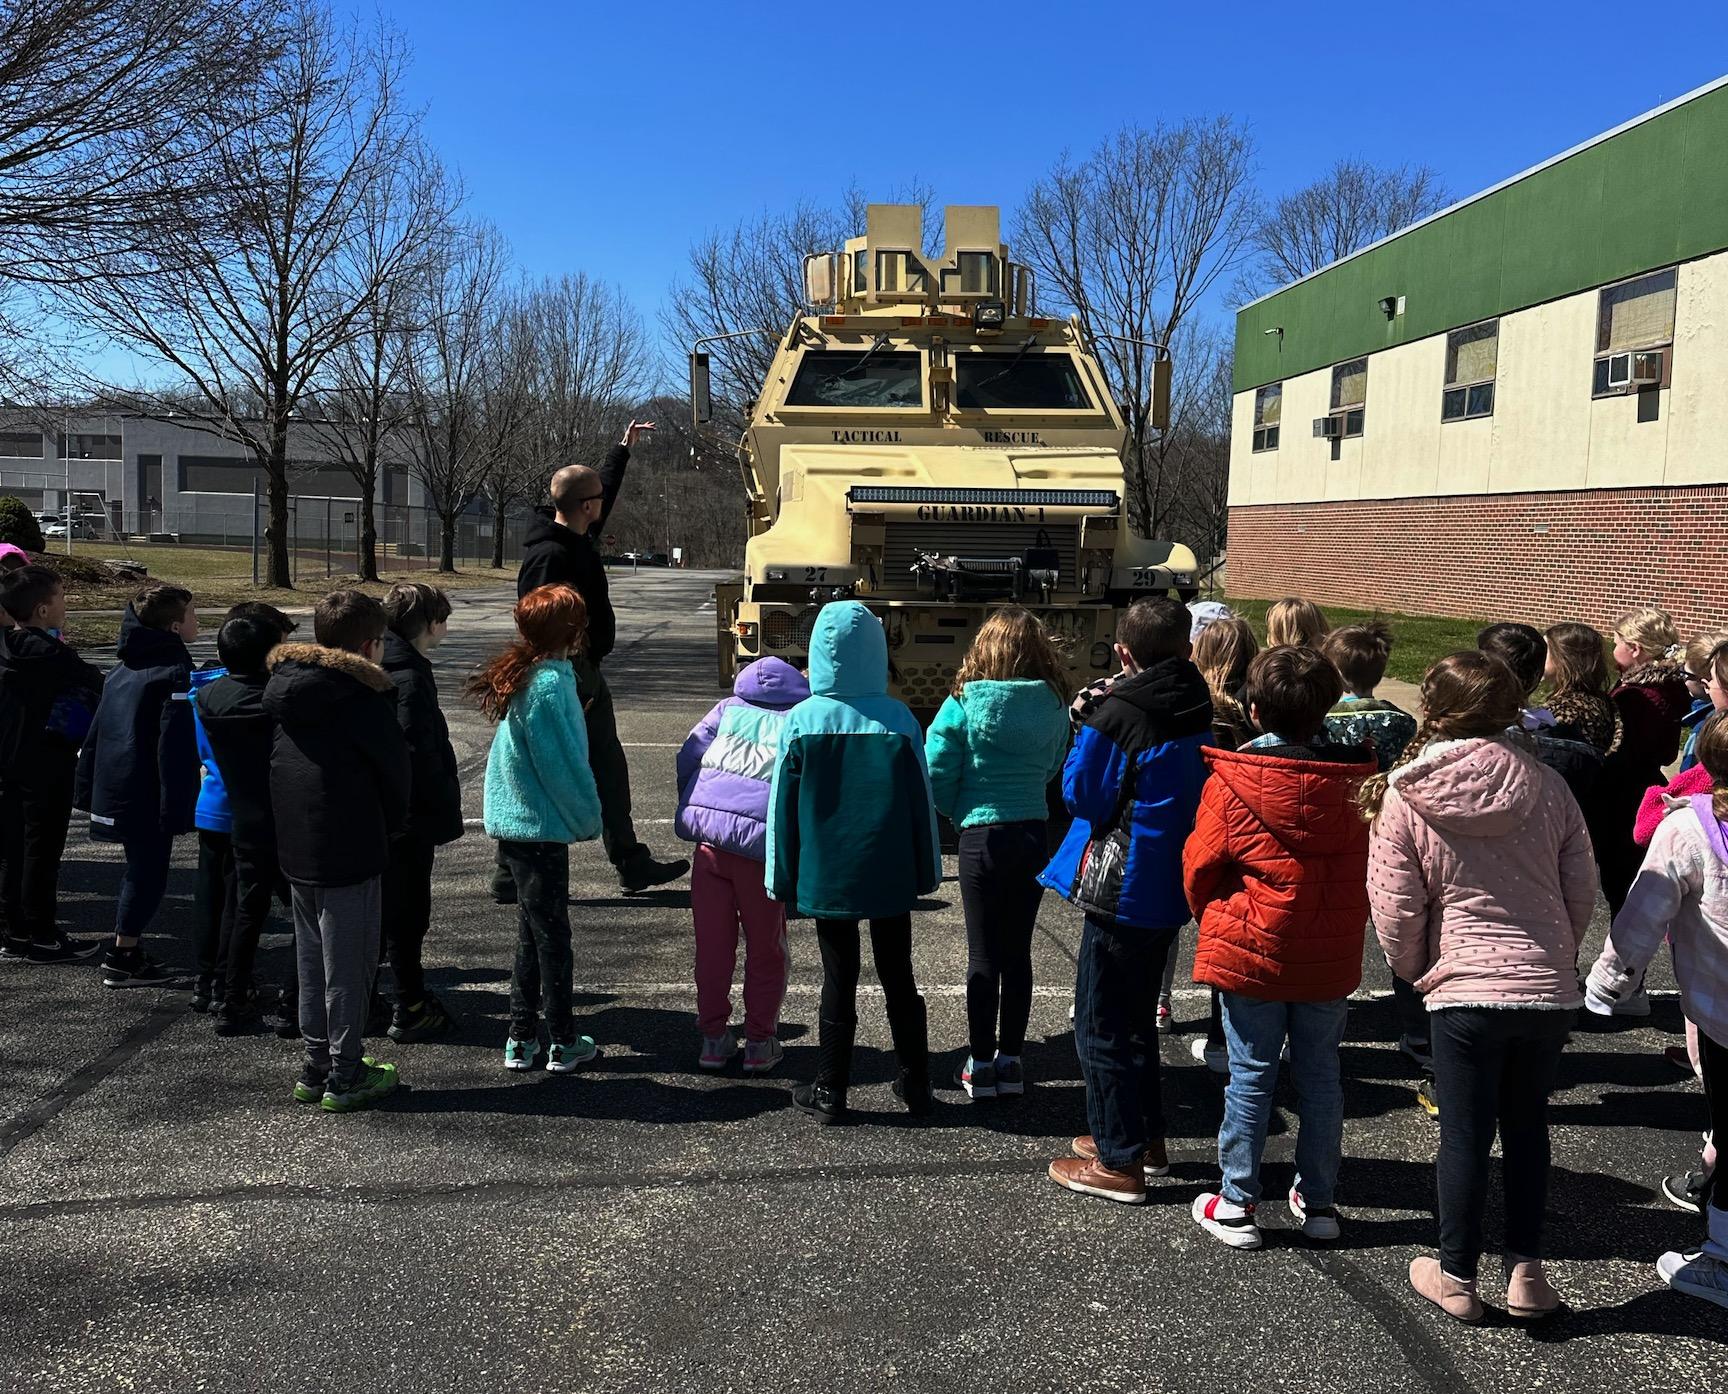 Sgt. Coleman explained the features of the SWAT vehicle to the students